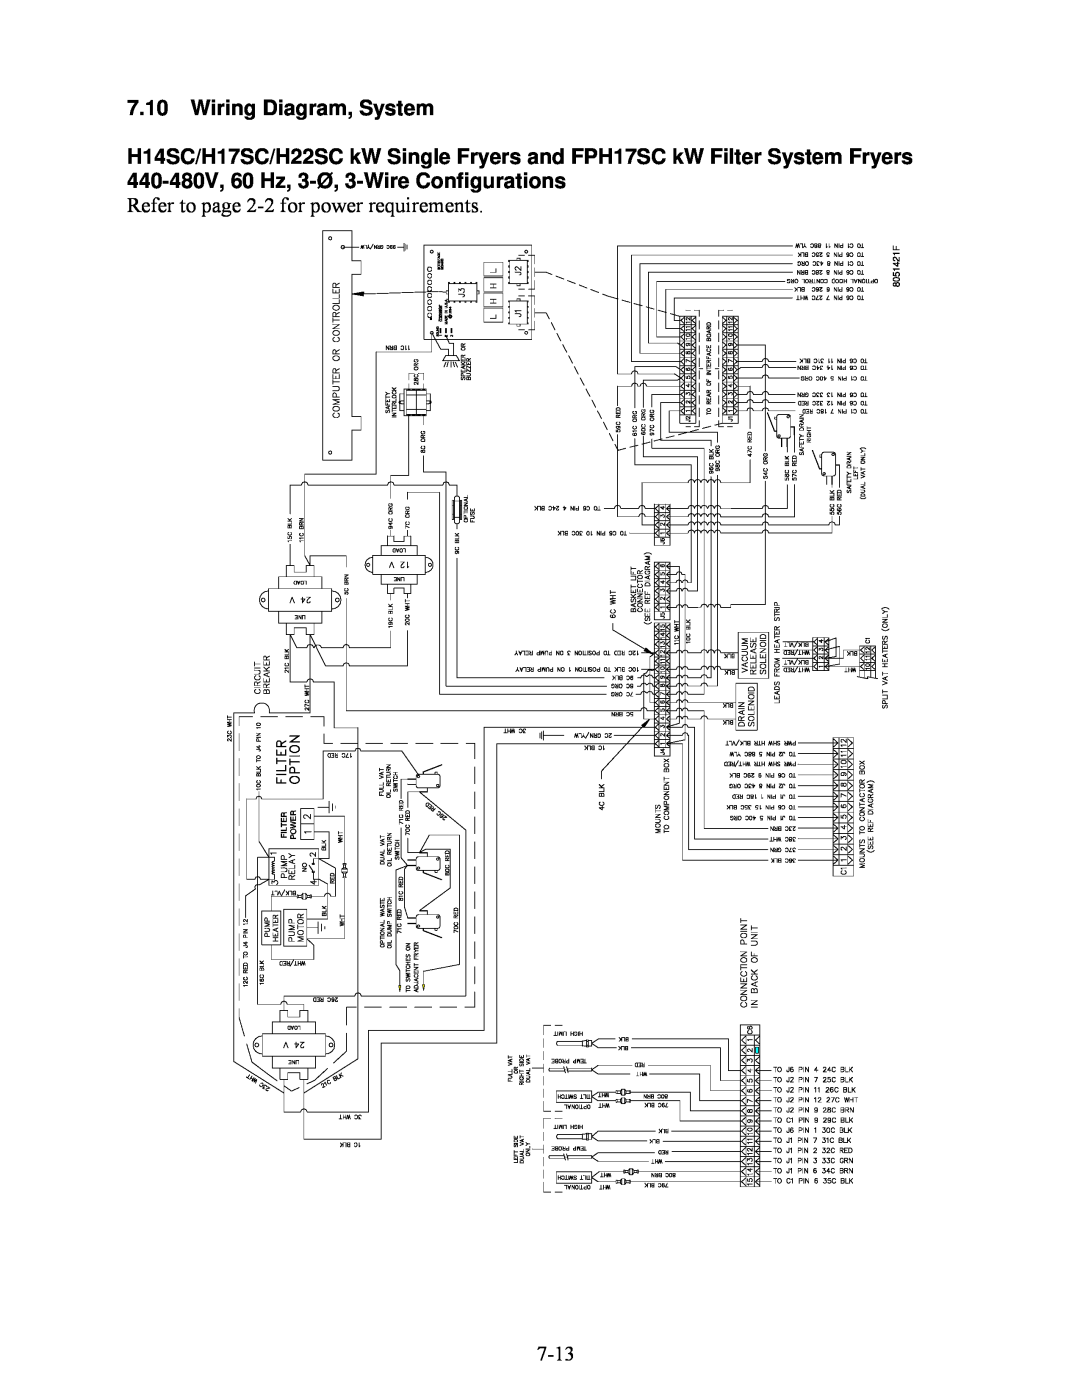 Frymaster H22SC, H17SC, H14SC manual Wiring Diagram, System, Refer to page 2-2 for power requirements, 7-13, 8051421F 